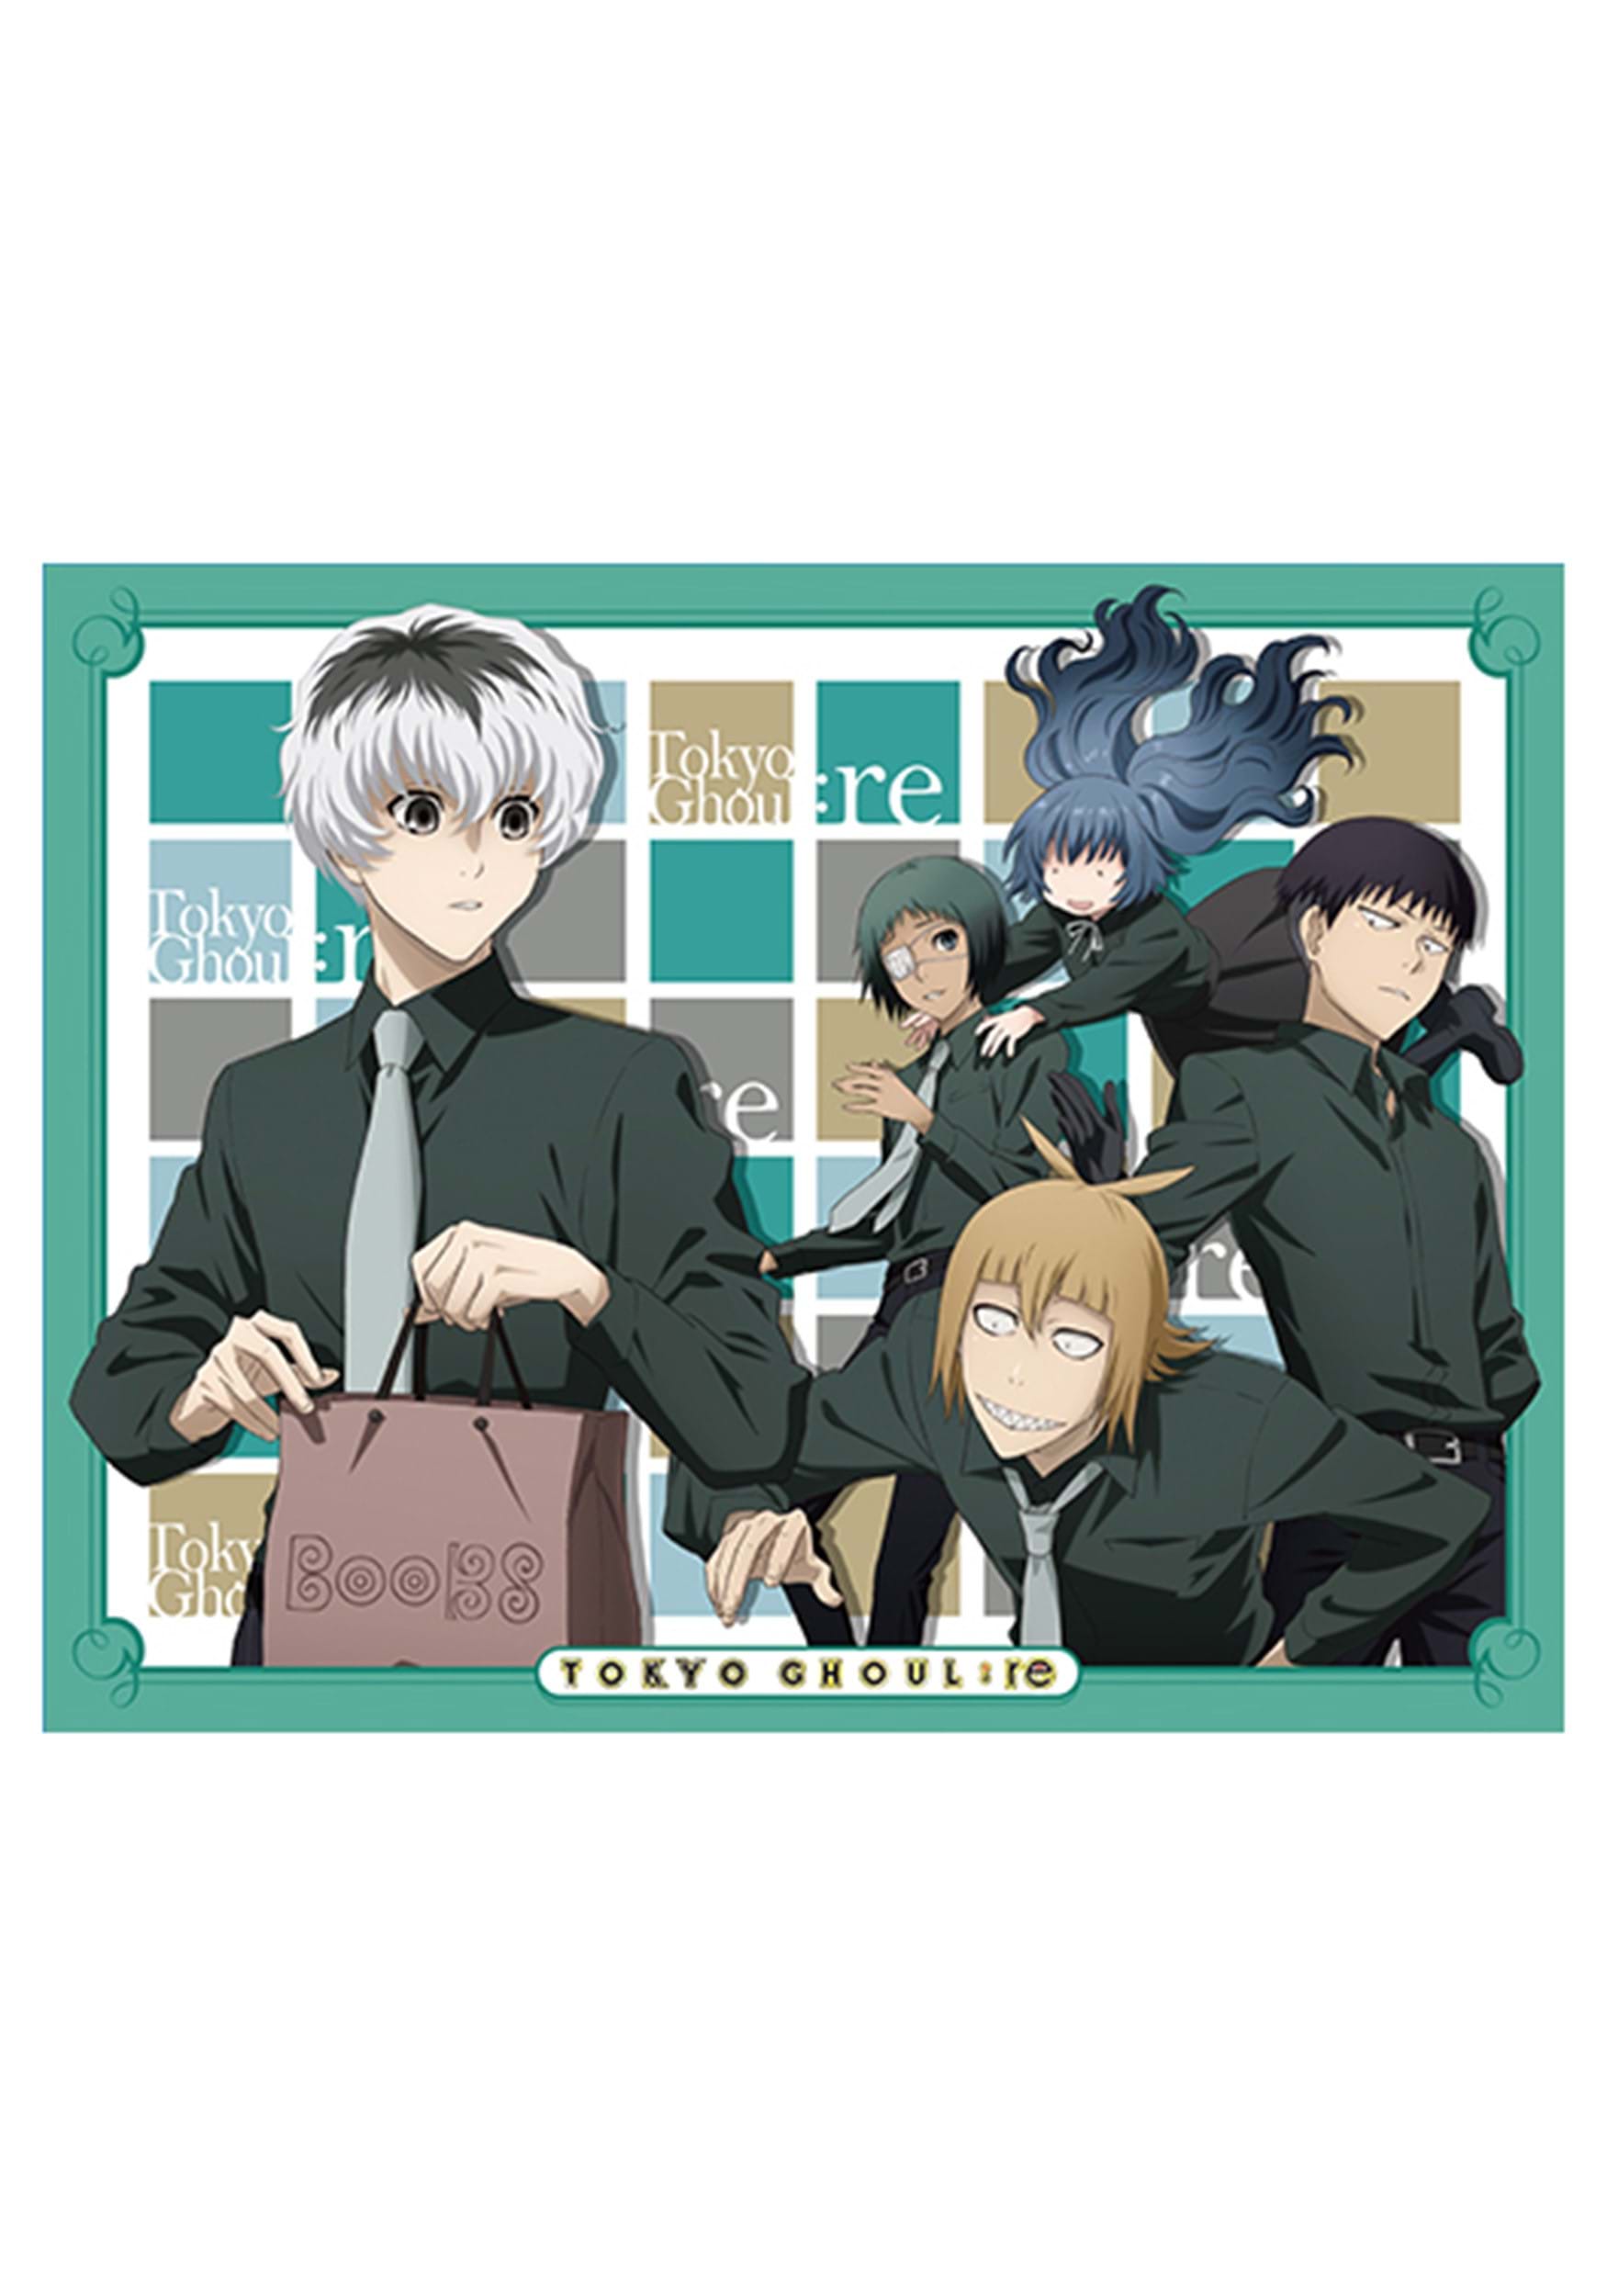 Tokyo Ghoul Re Group Sublimation Adult Throw Blanket